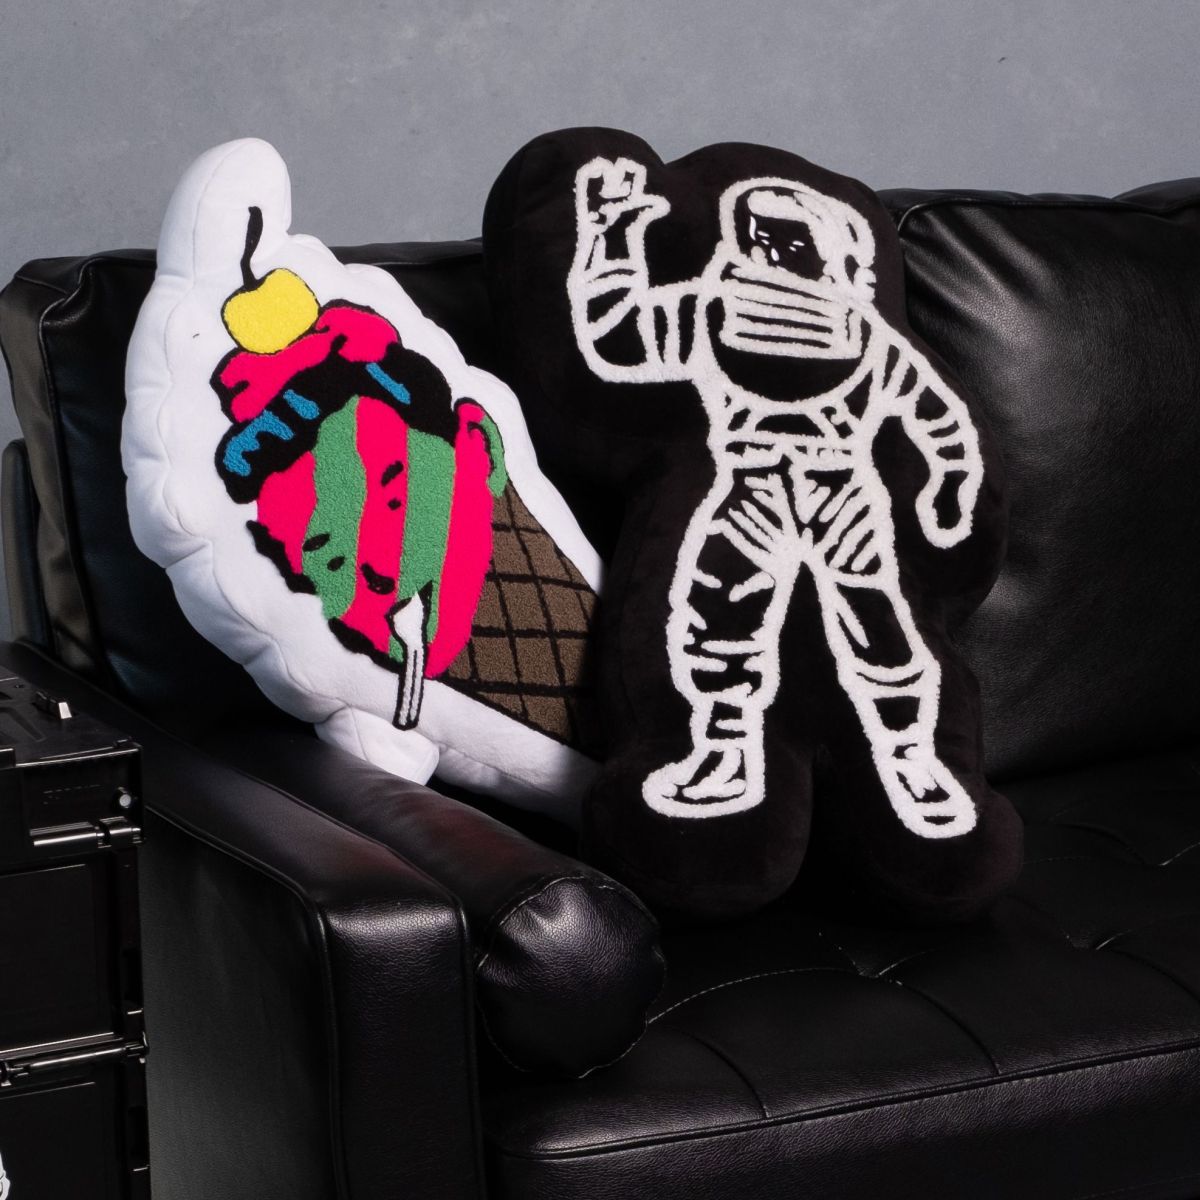 BILLIONAIRE BOYS CLUB AND ICECREAM LAUNCH HOME GOODS COLLECTION